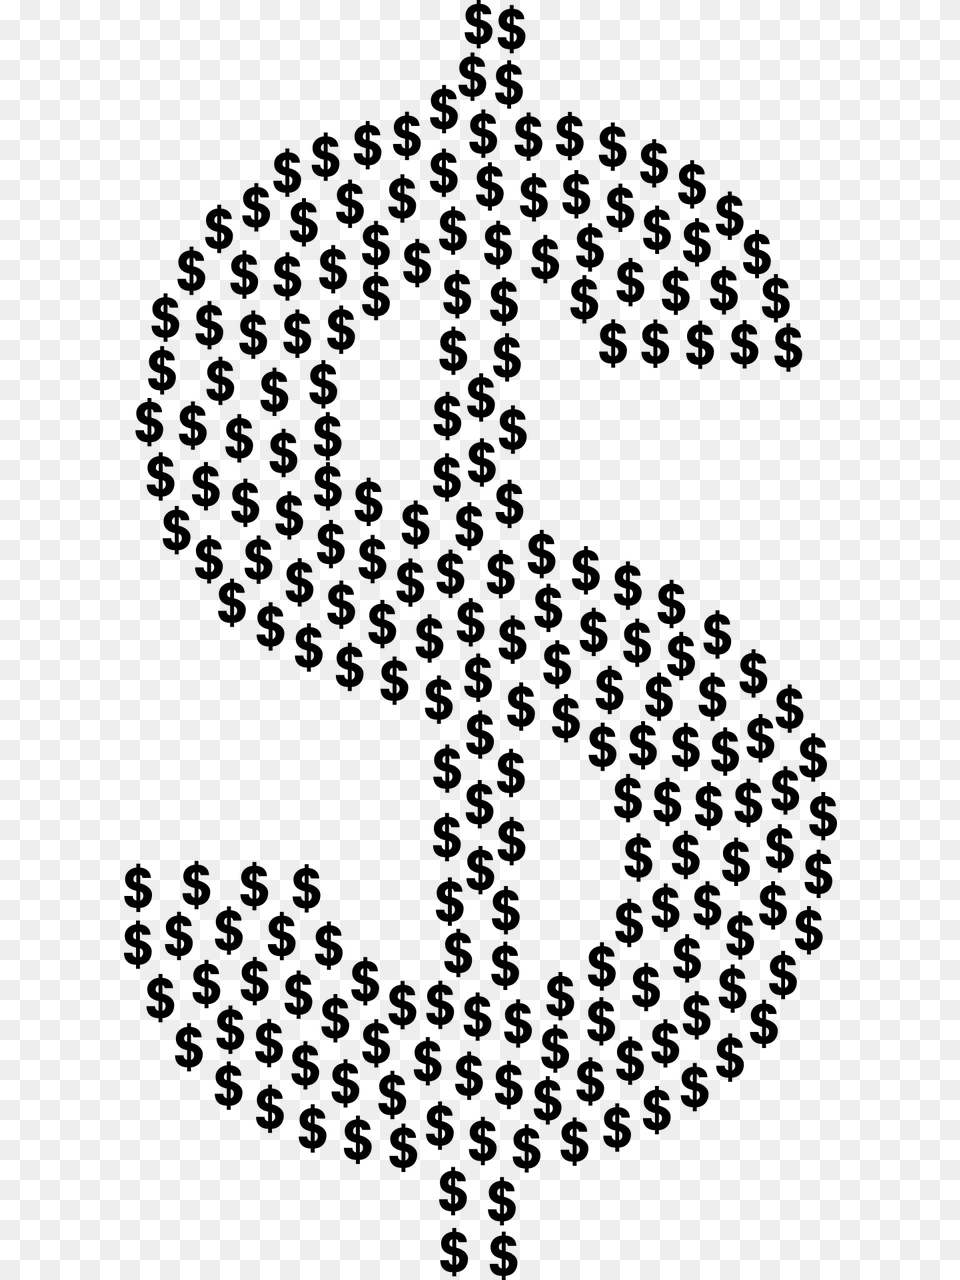 Dollar Sign Fractal Money Image Behind The Scenes Shadowhunters, Gray Png